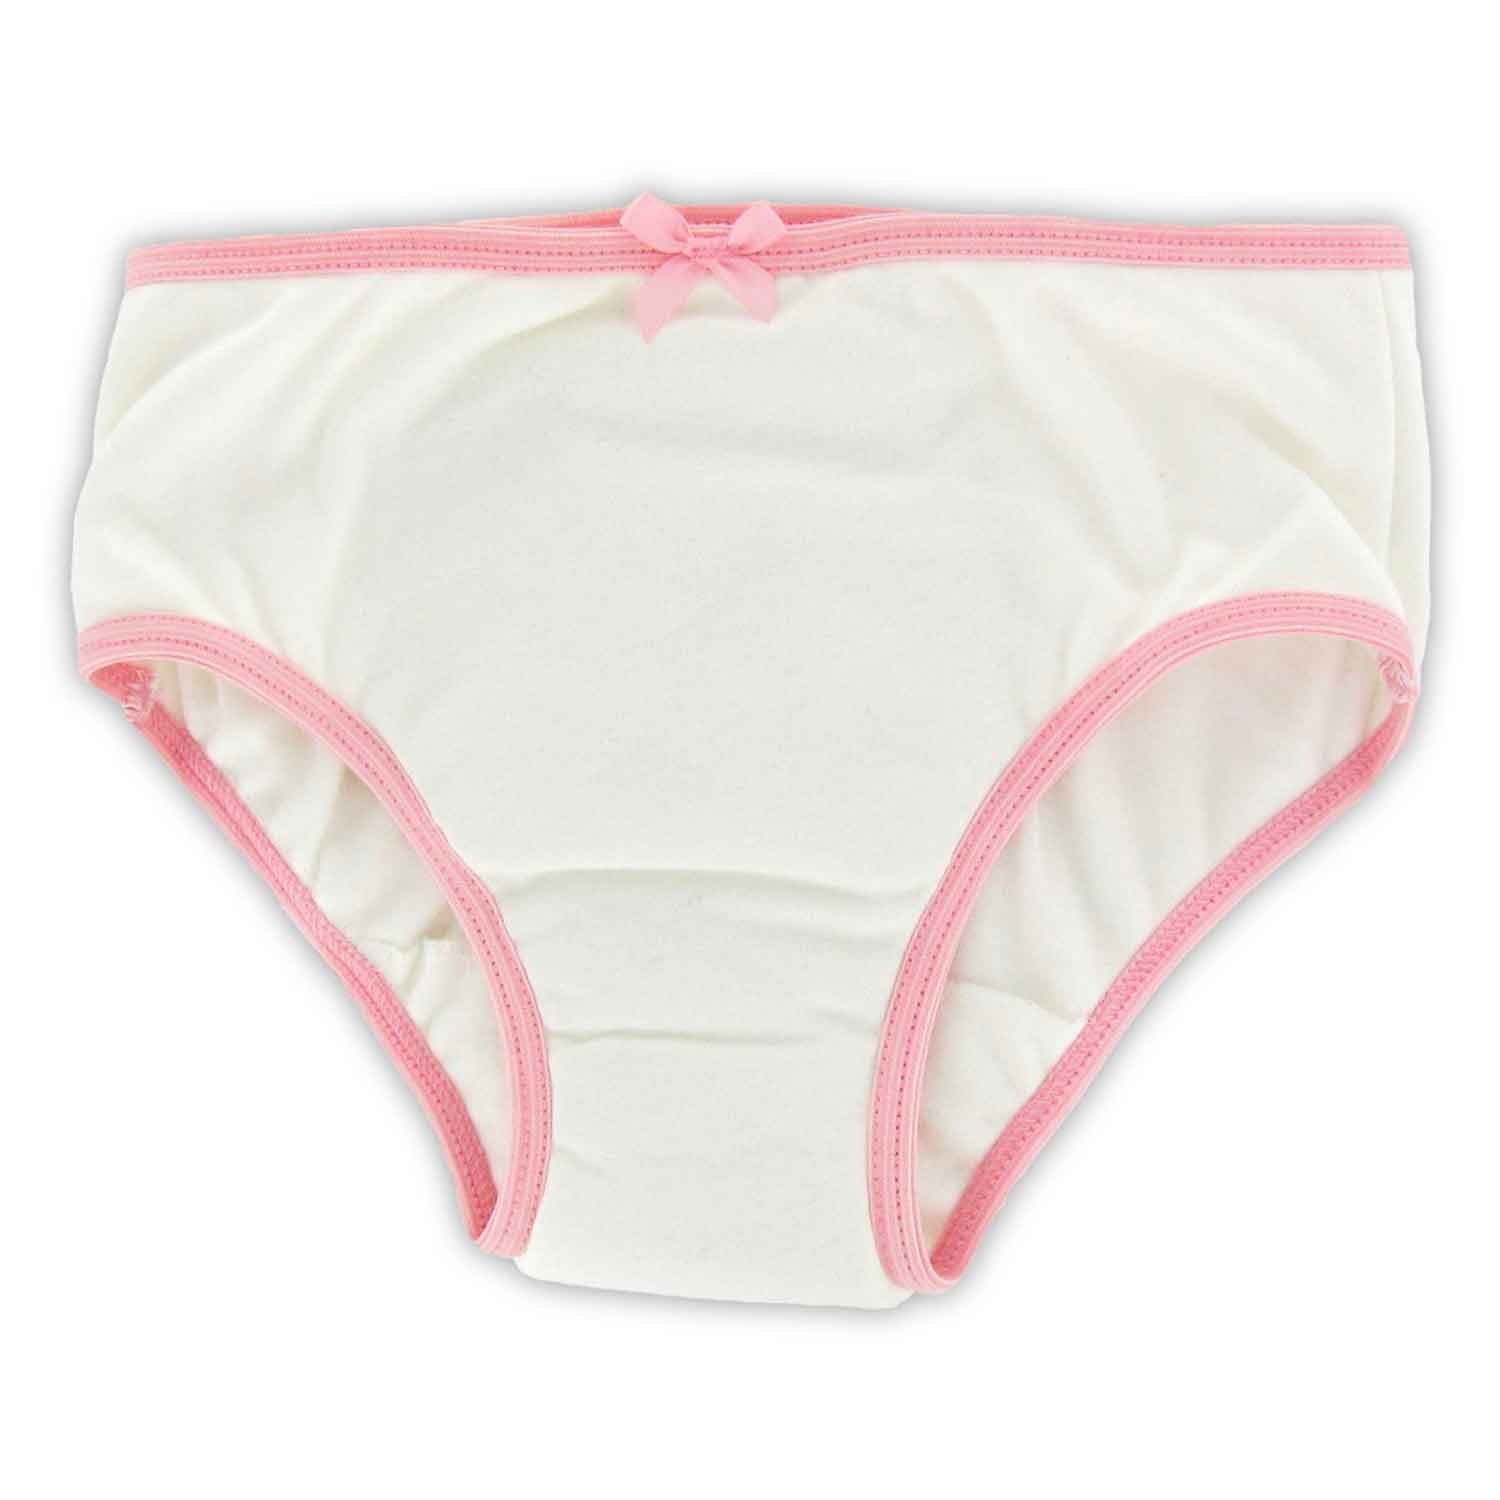 Waterproof Absorbent Incontinence Underwear for Kiddos with Special Needs –  Super Undies